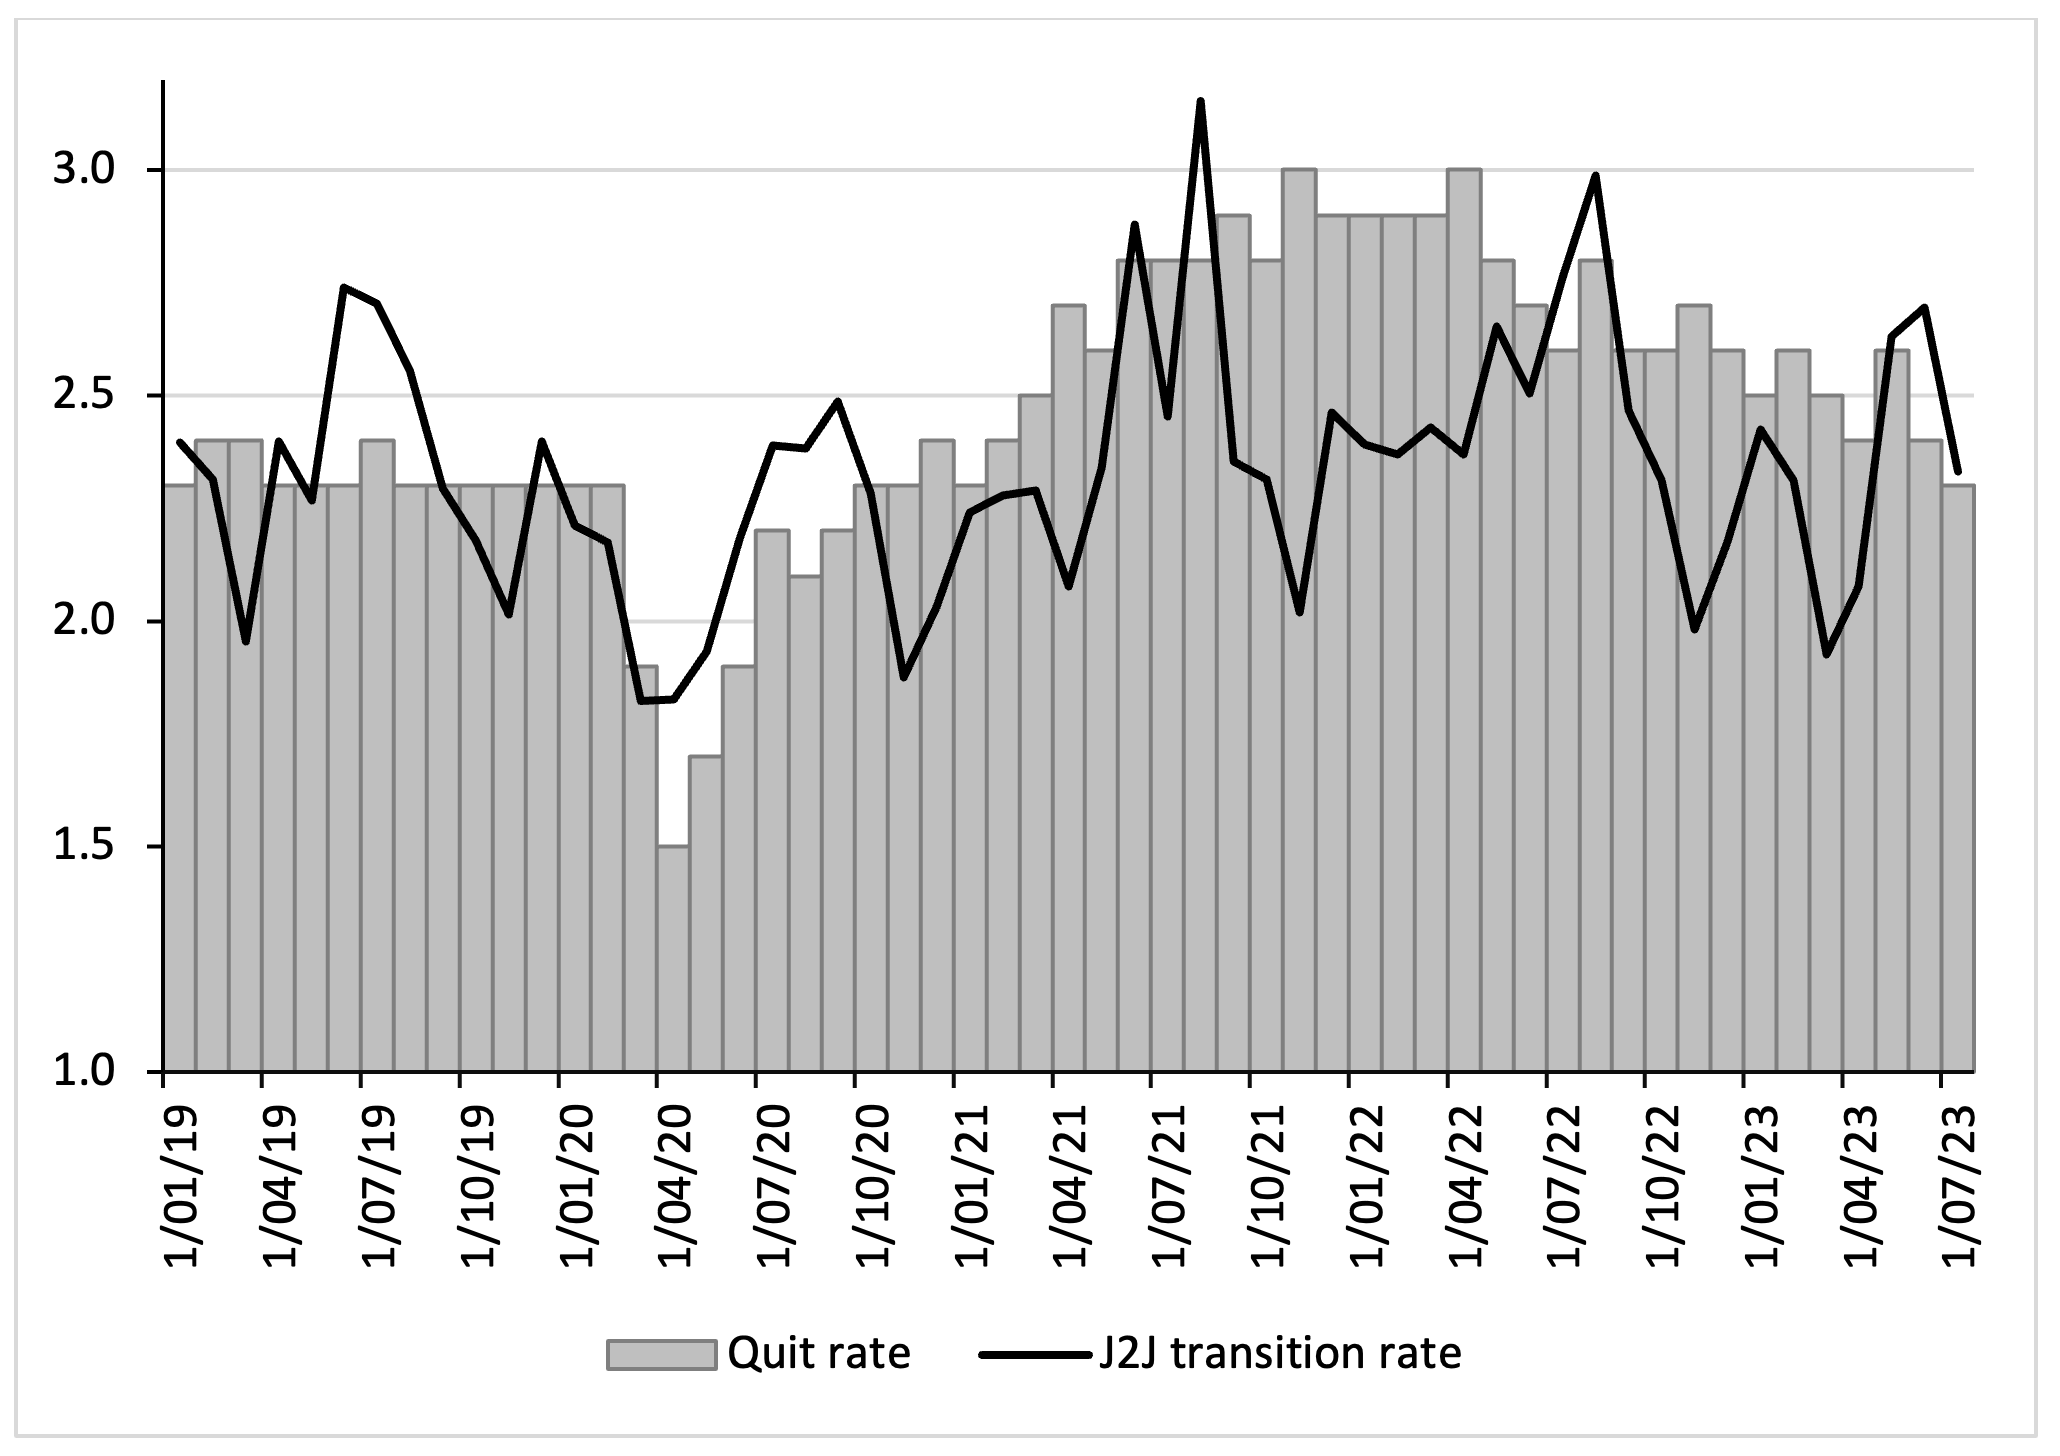 Total non-farm quit rate and job-to-job (J2J) transition rate: the U.S. economy (2019Q1-2023Q3)